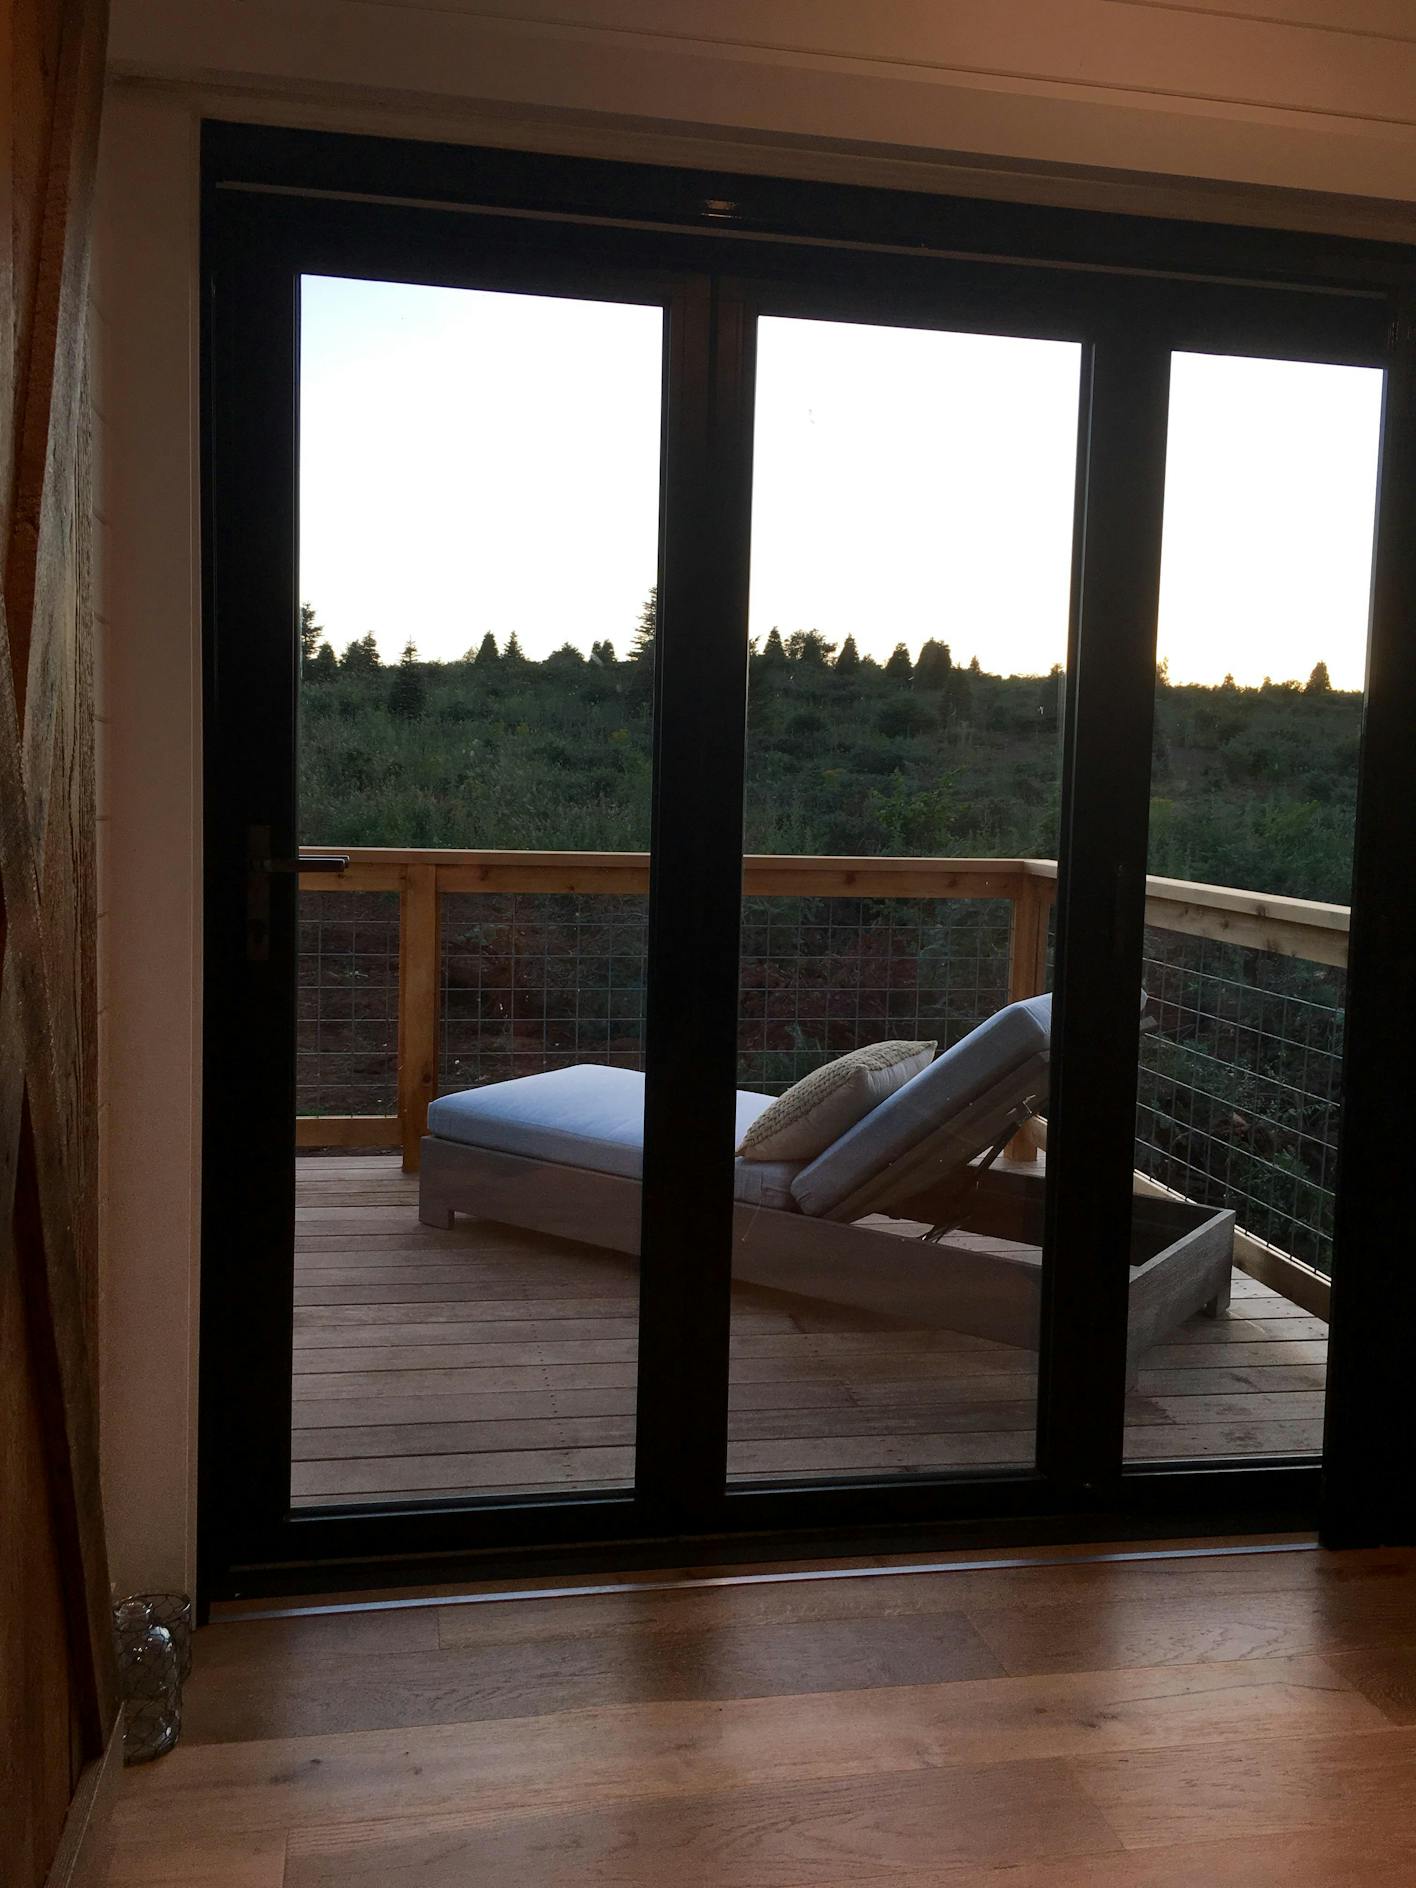 The master bedroom inside Shawn and Shelly's tiny home in Maui